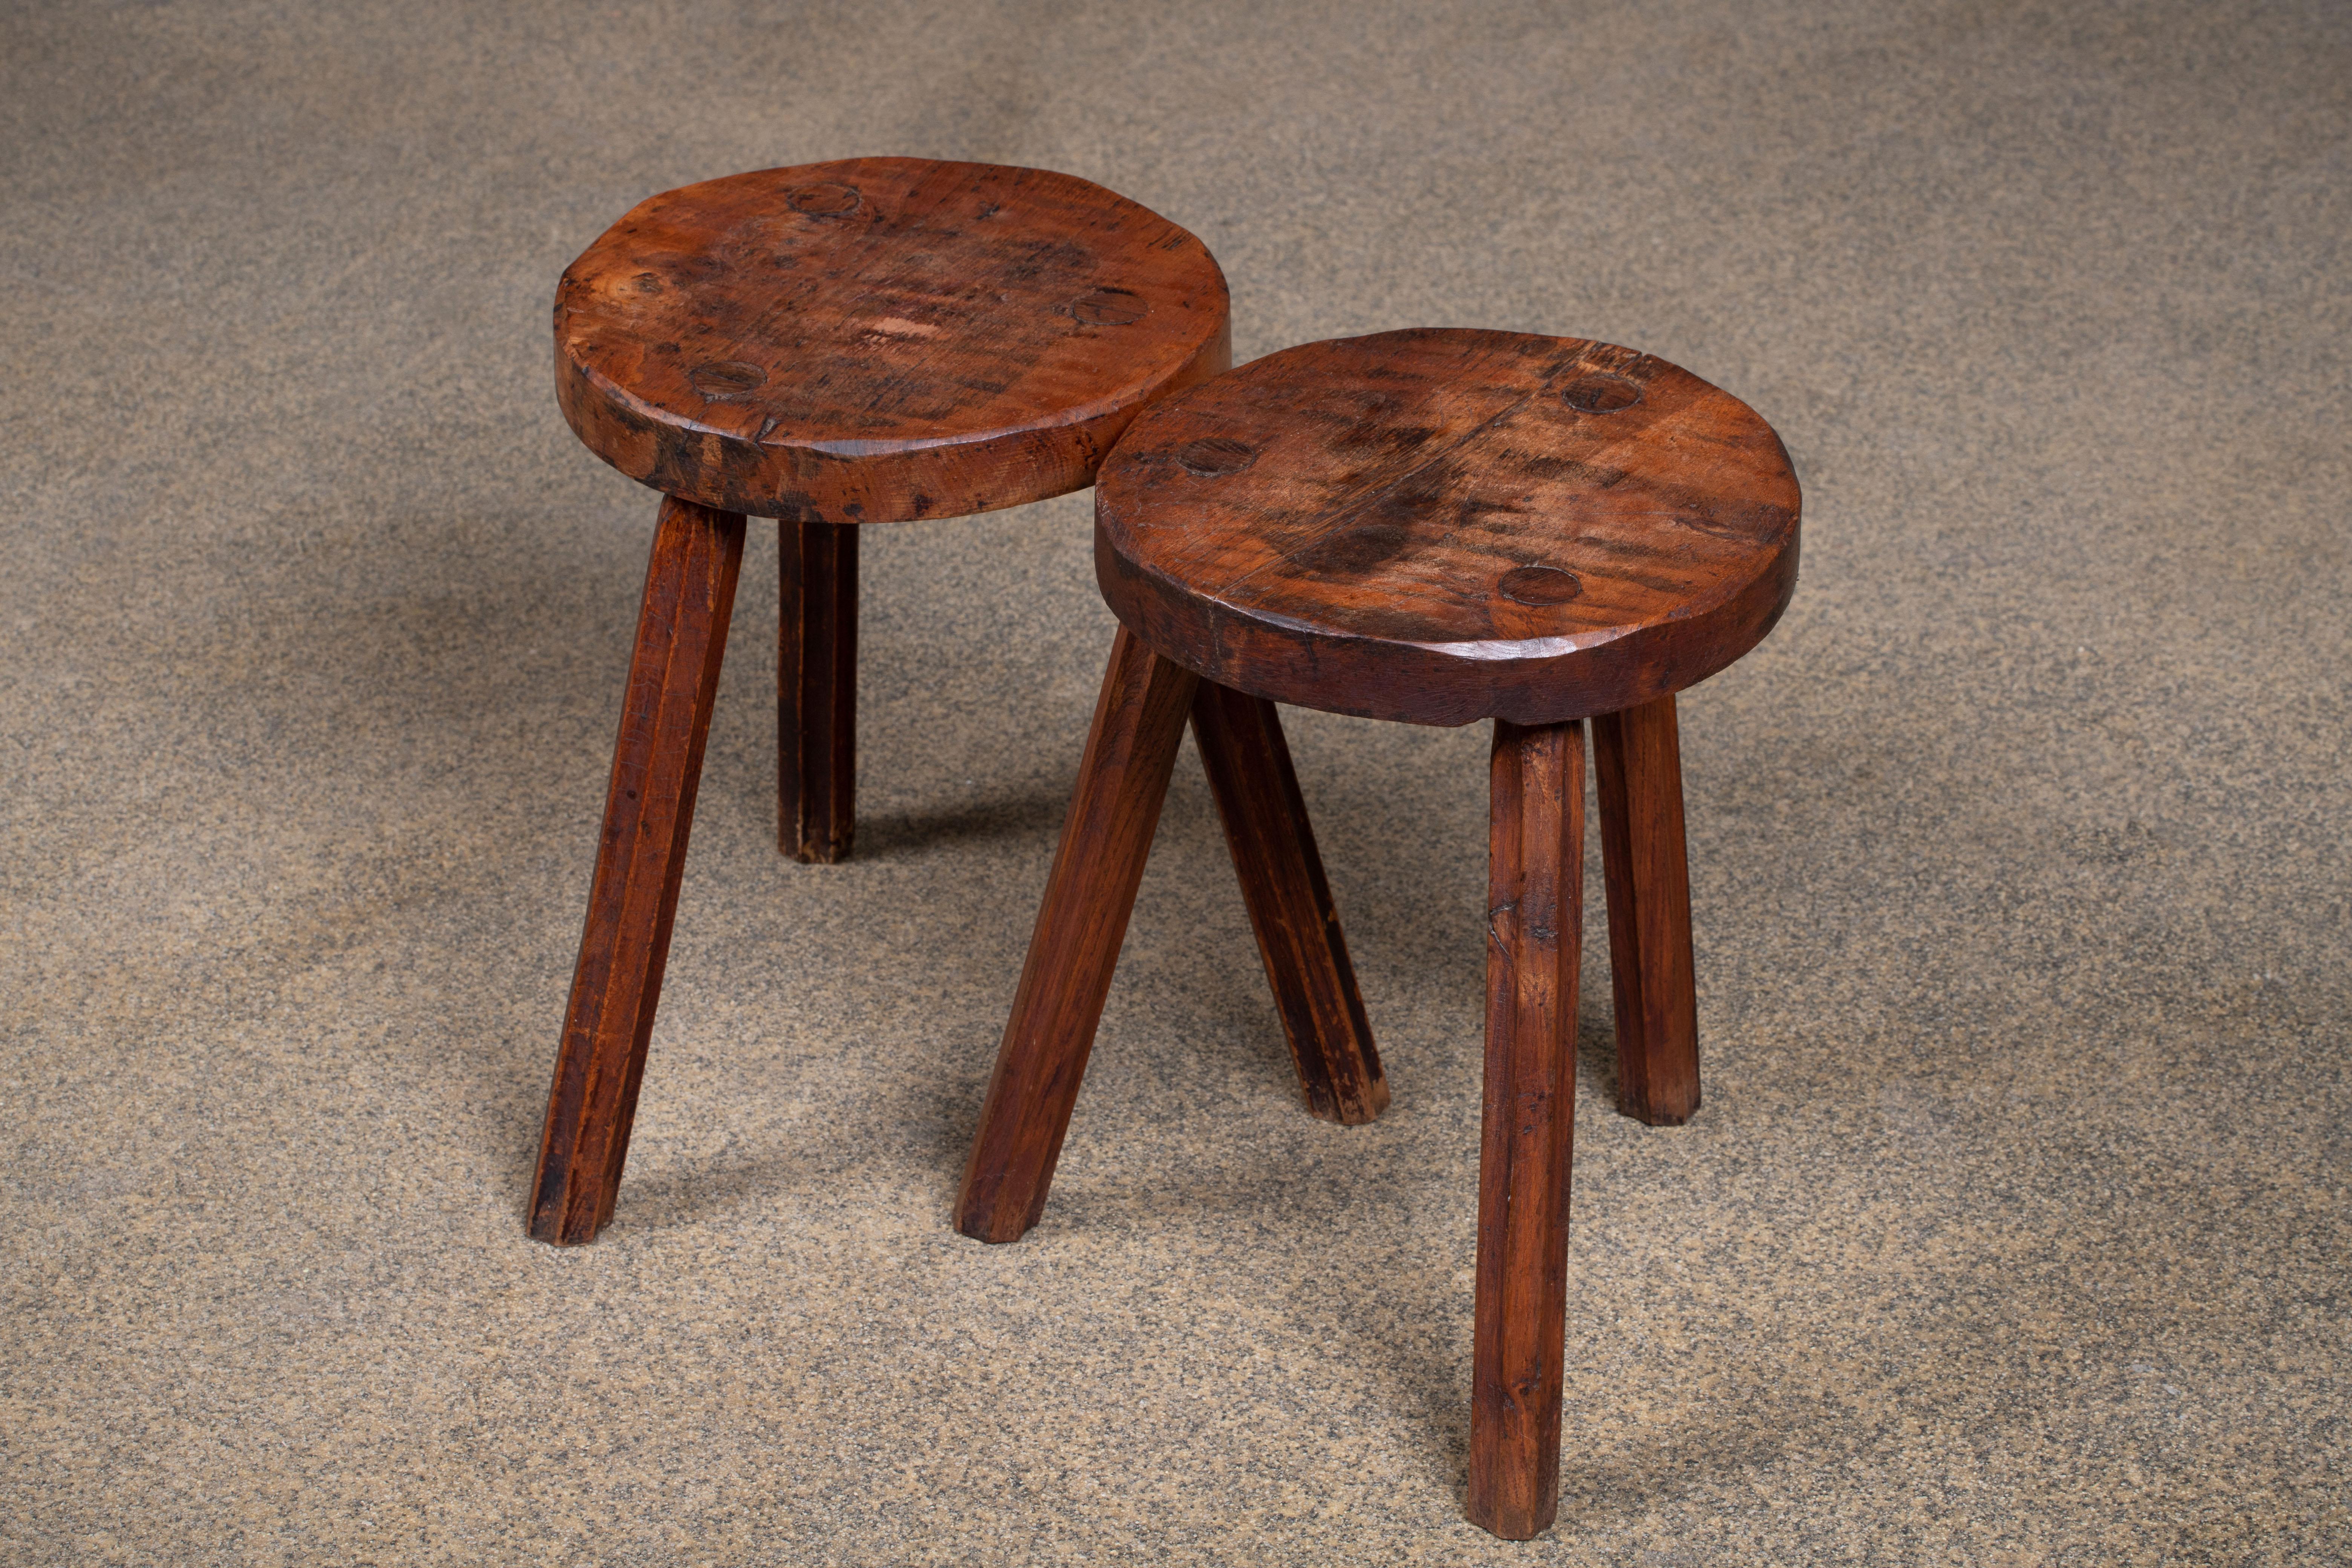 Fantastic wood stool from France reminiscent the work of Jean Touret, Atelier Marolles. Made in the 1960s with three legs. No hardware. Good vintage condition.
 